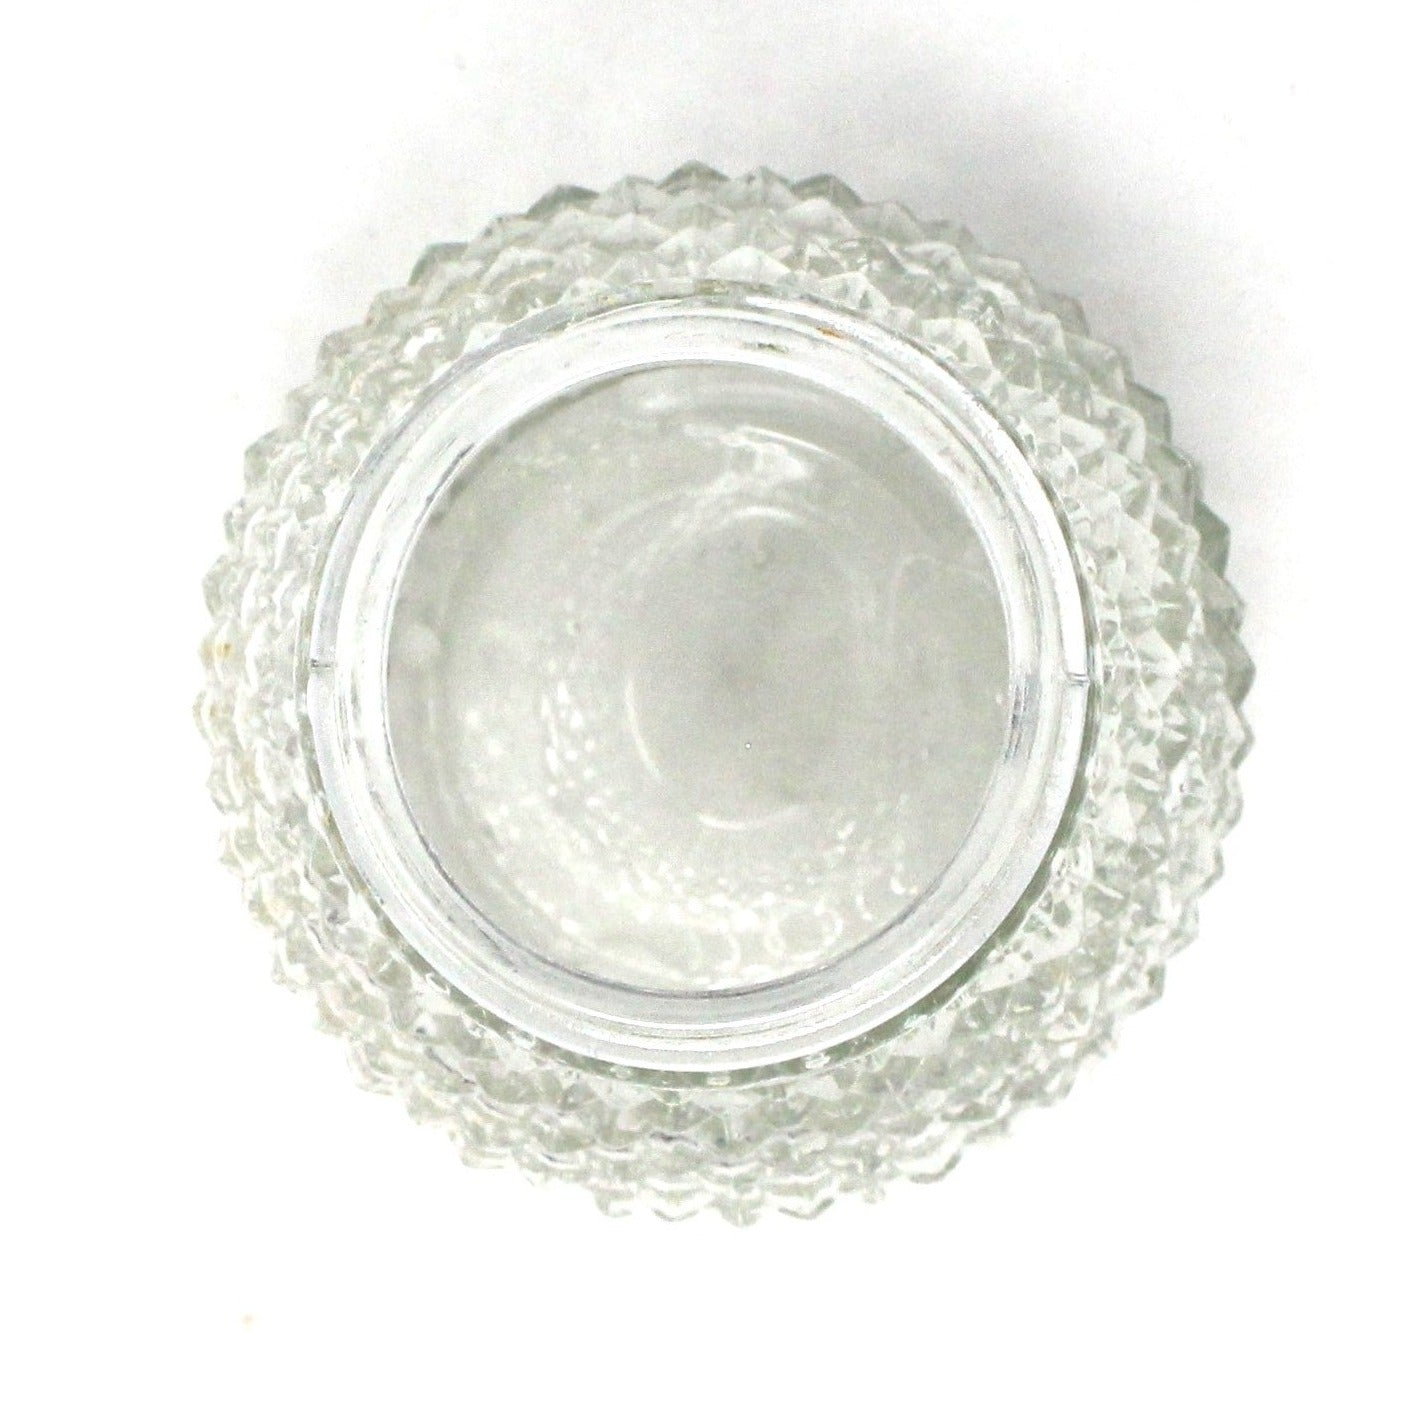 Shaker, Diamond Point, Glass with Silver Metal Top, Vintage Import